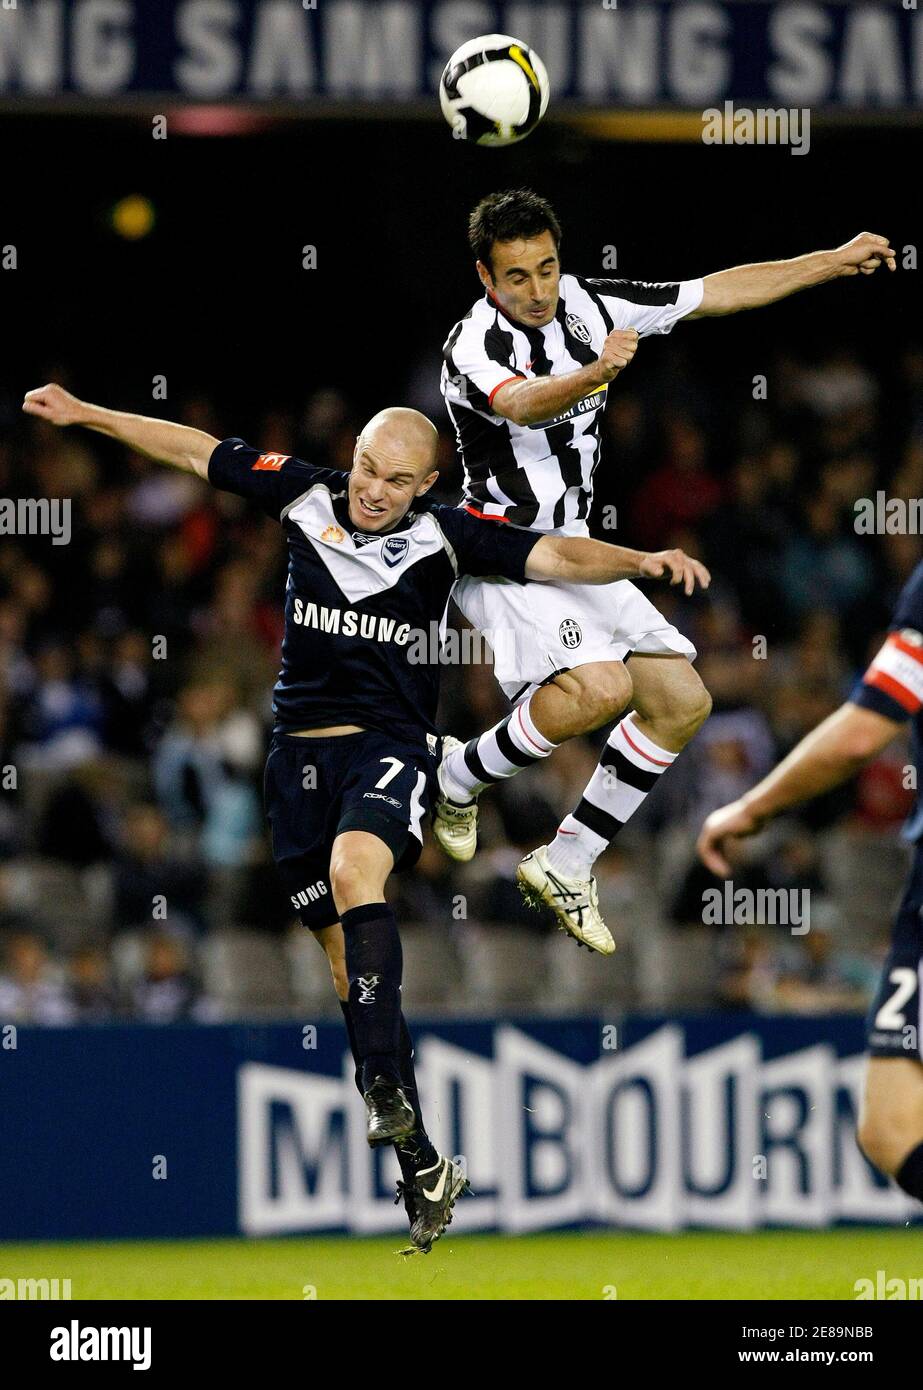 Juventus's Marco Marchionni (R) heads the ball past Melbourne Victory's Matthew Kemp to score a goal during their friendly soccer match in Melbourne May 30, 2008.    REUTERS/Mick Tsikas        (AUSTRALIA) Stock Photo